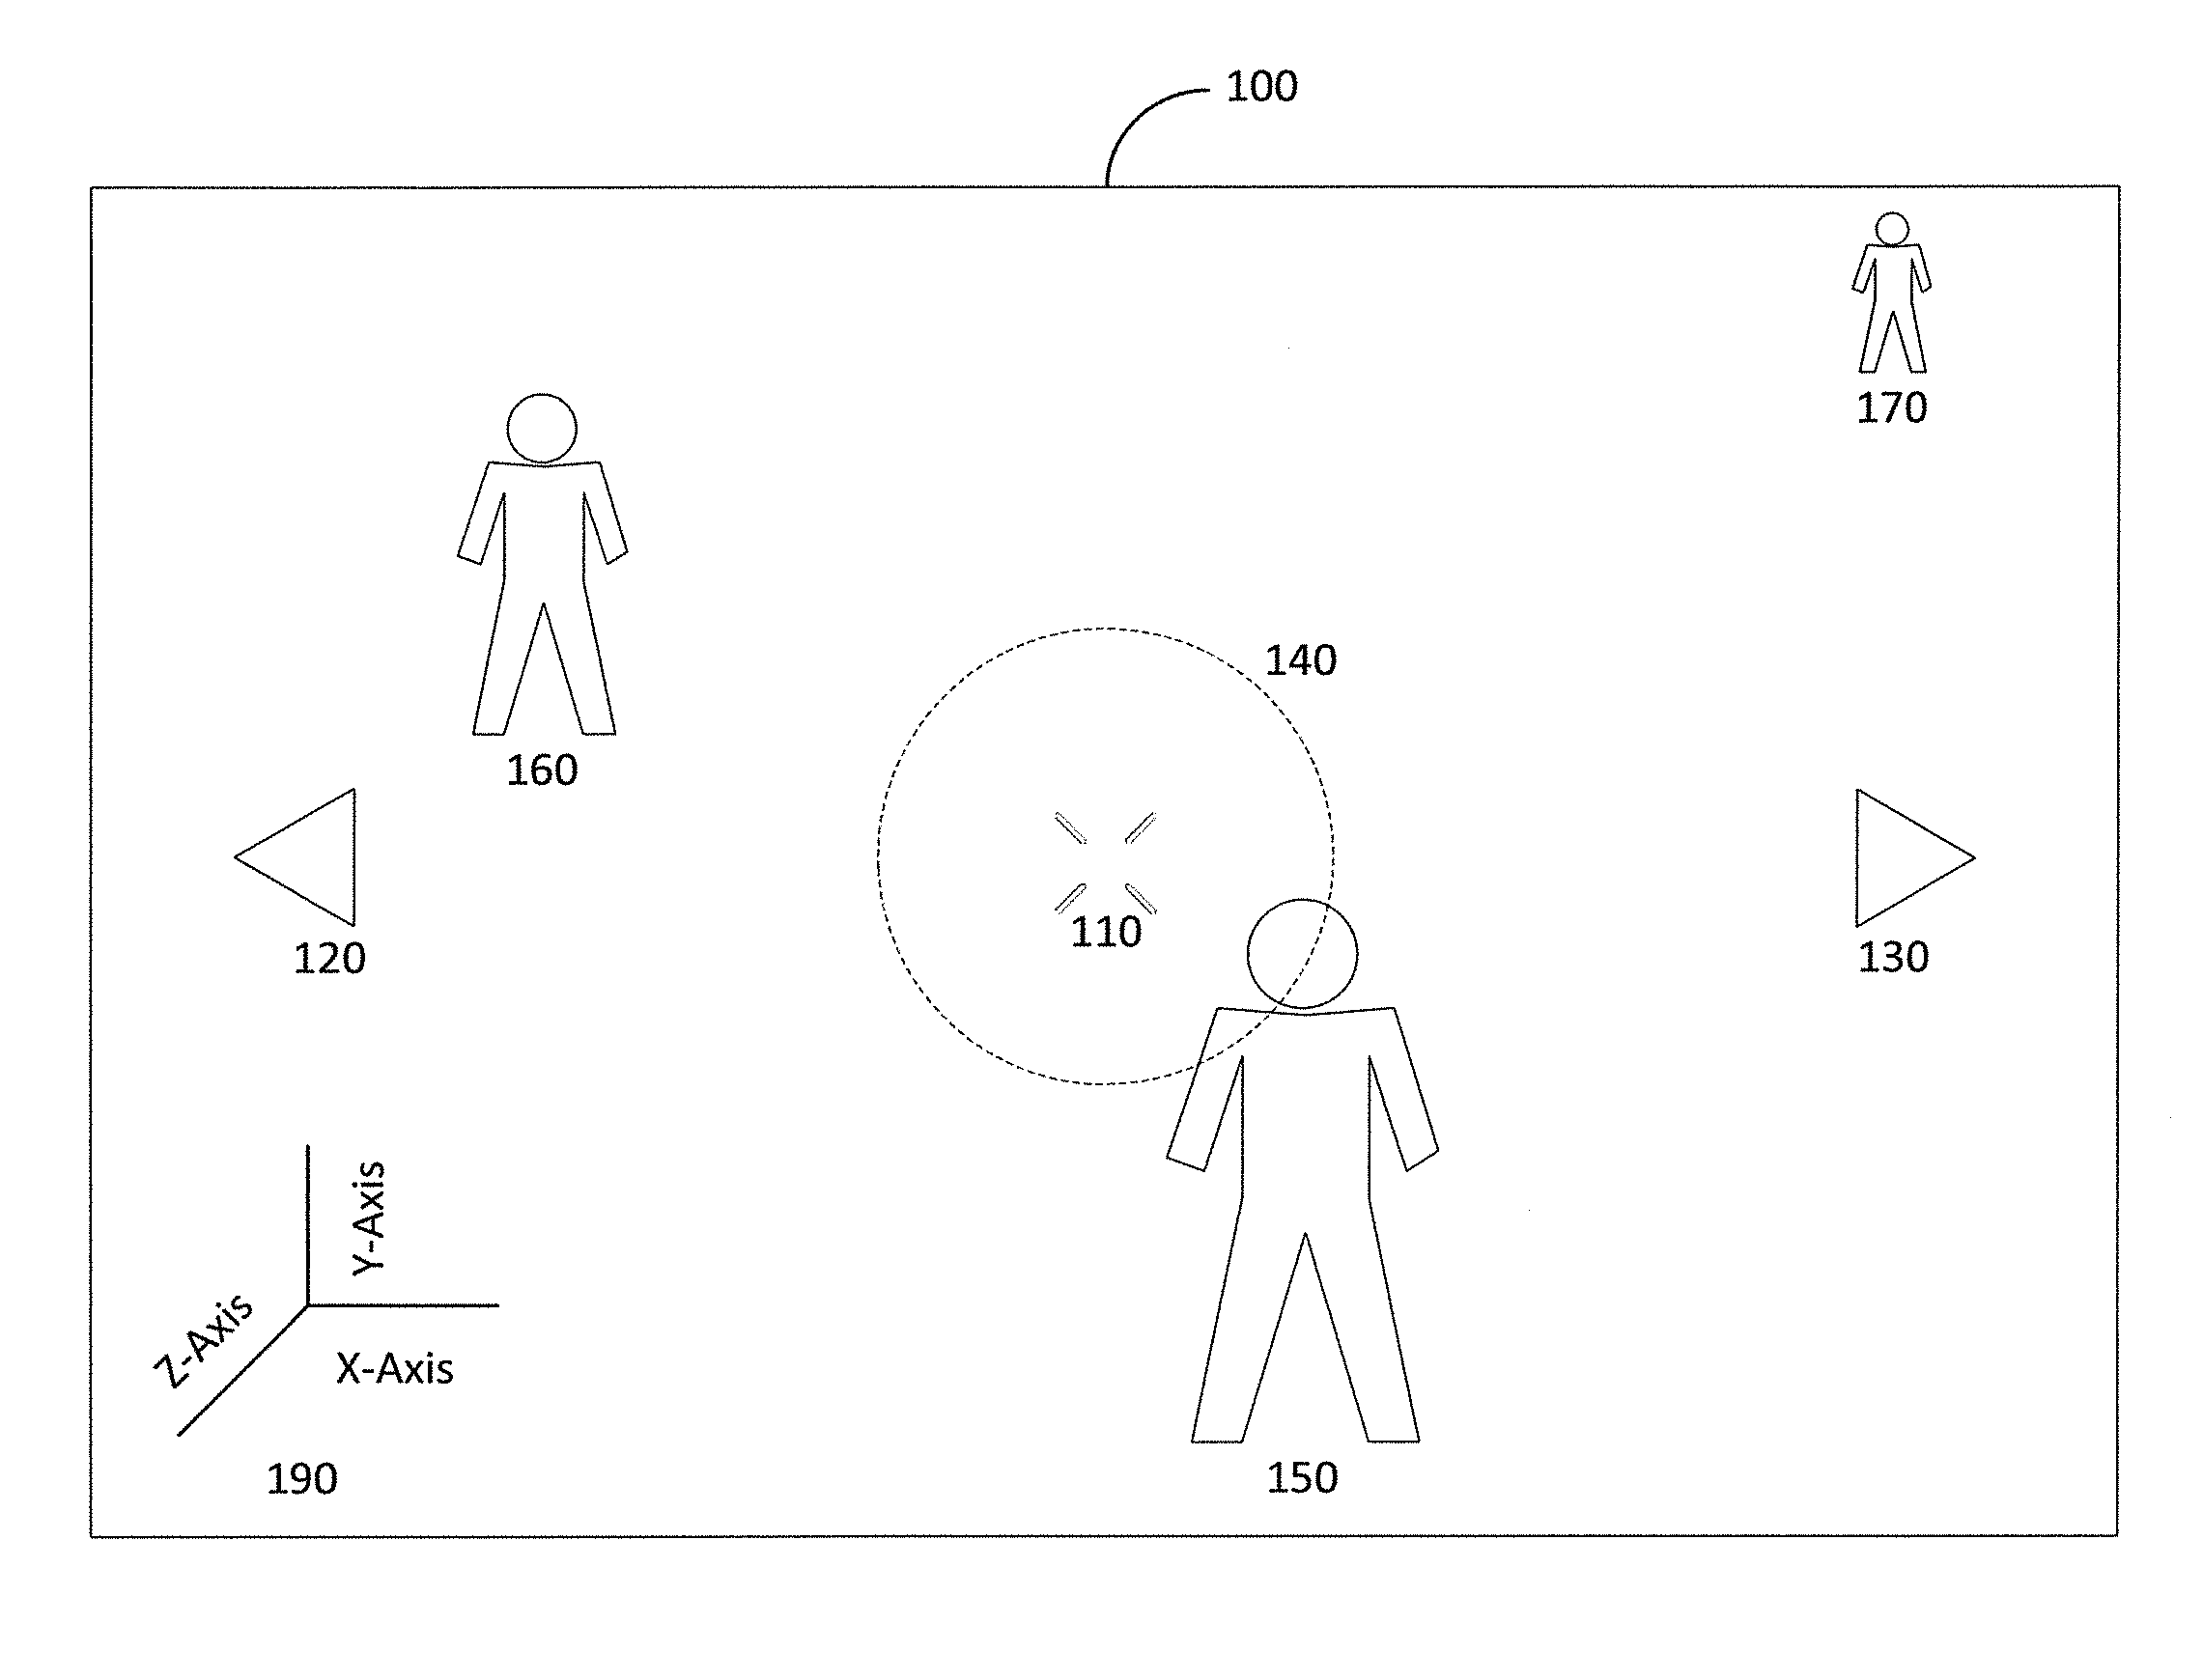 System and method for playing video games on touchscreen-based devices